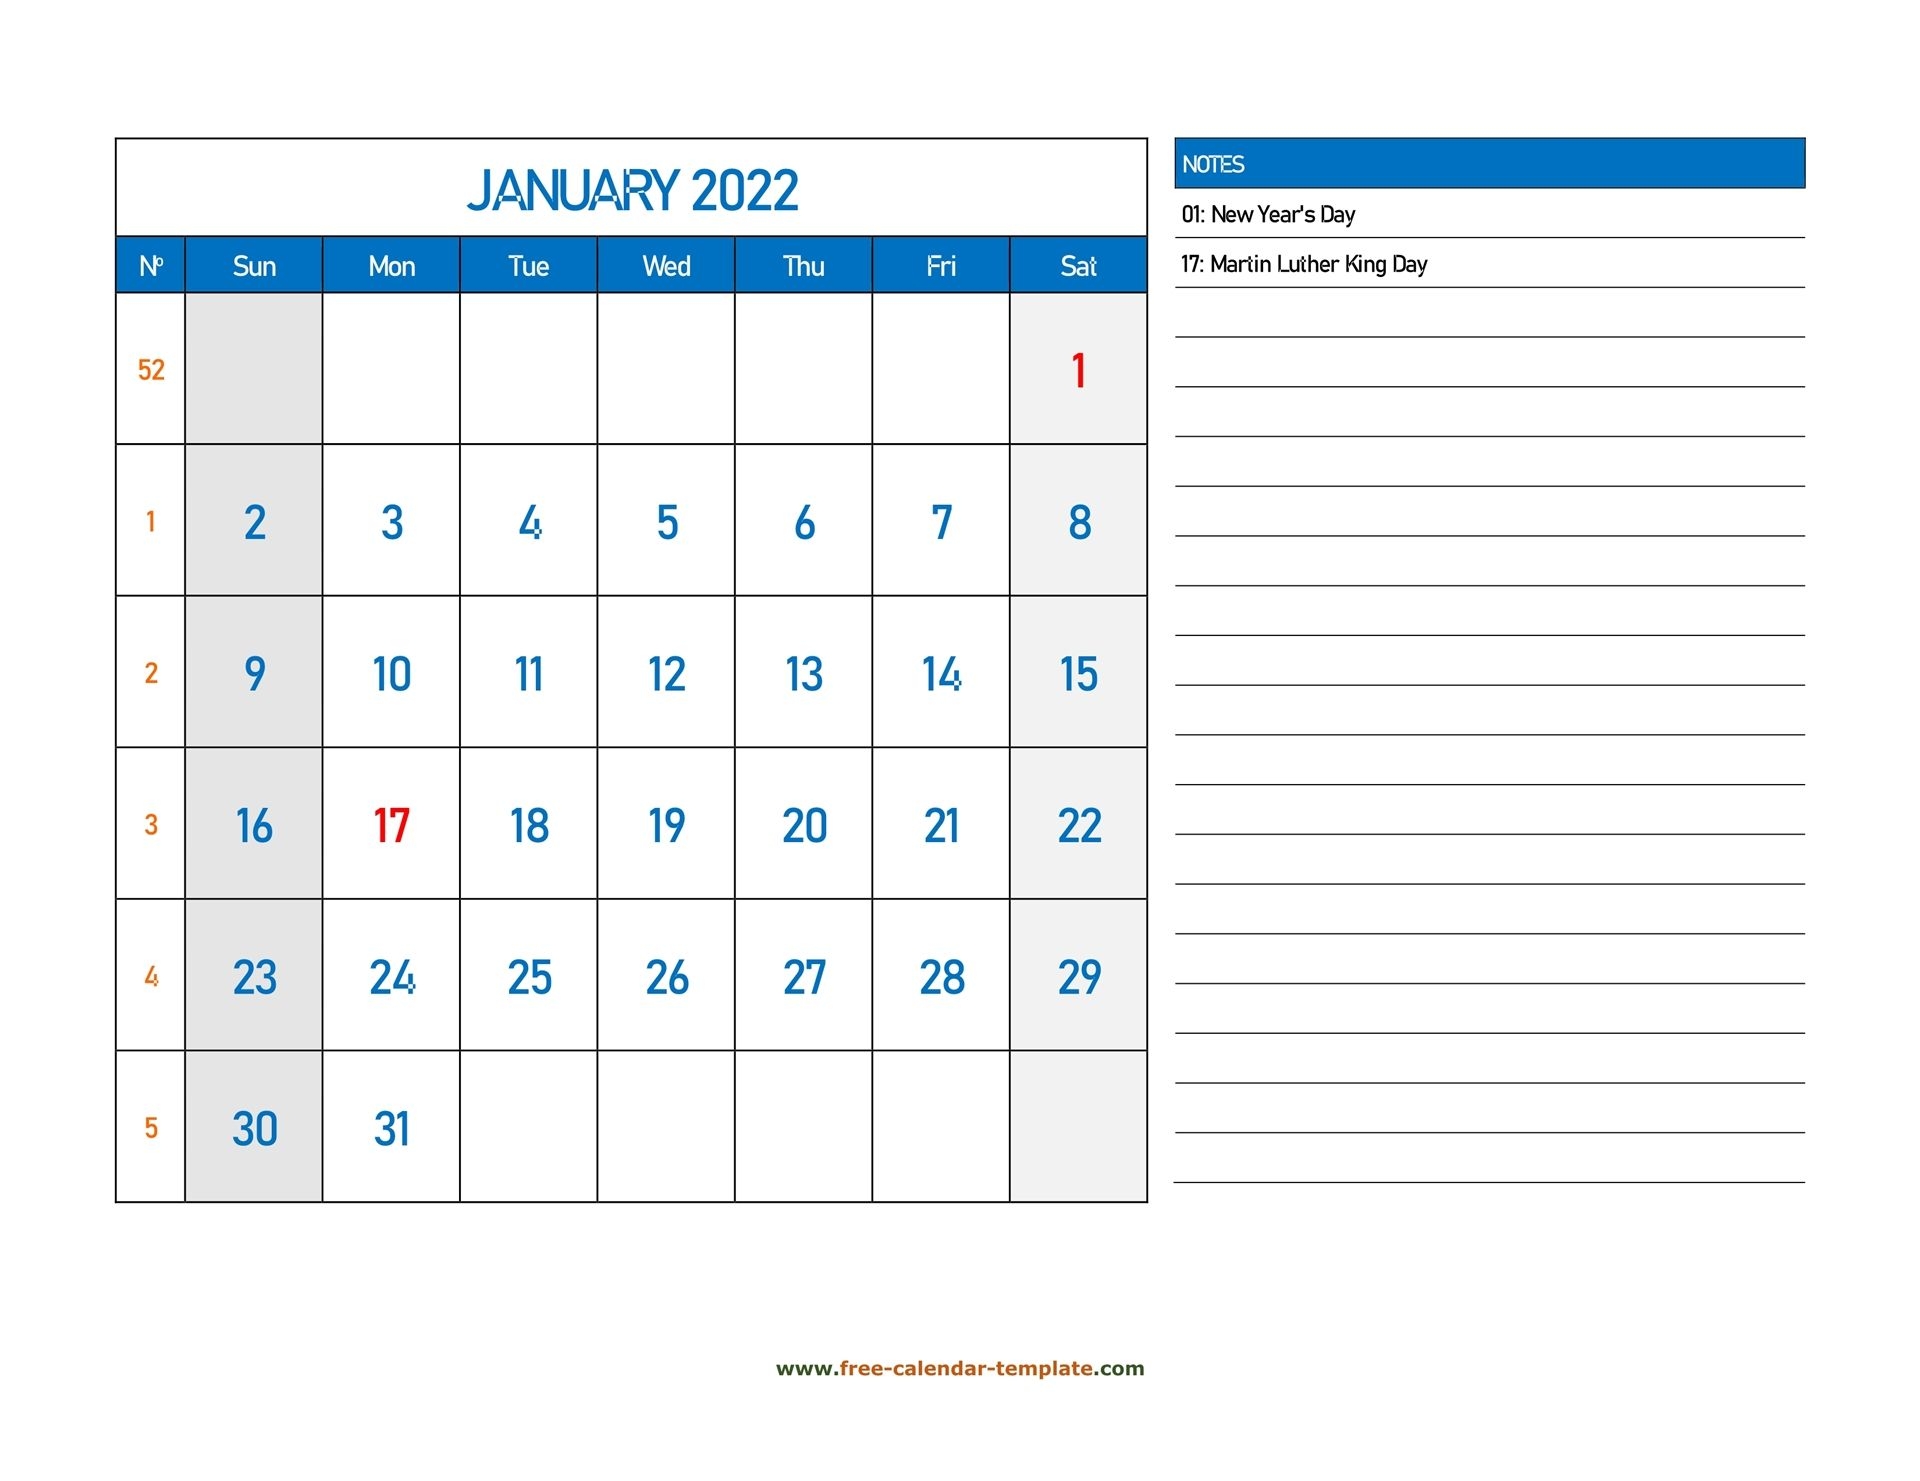 Monthly Calendar 2022 Grid Lines For Holidays And Notes